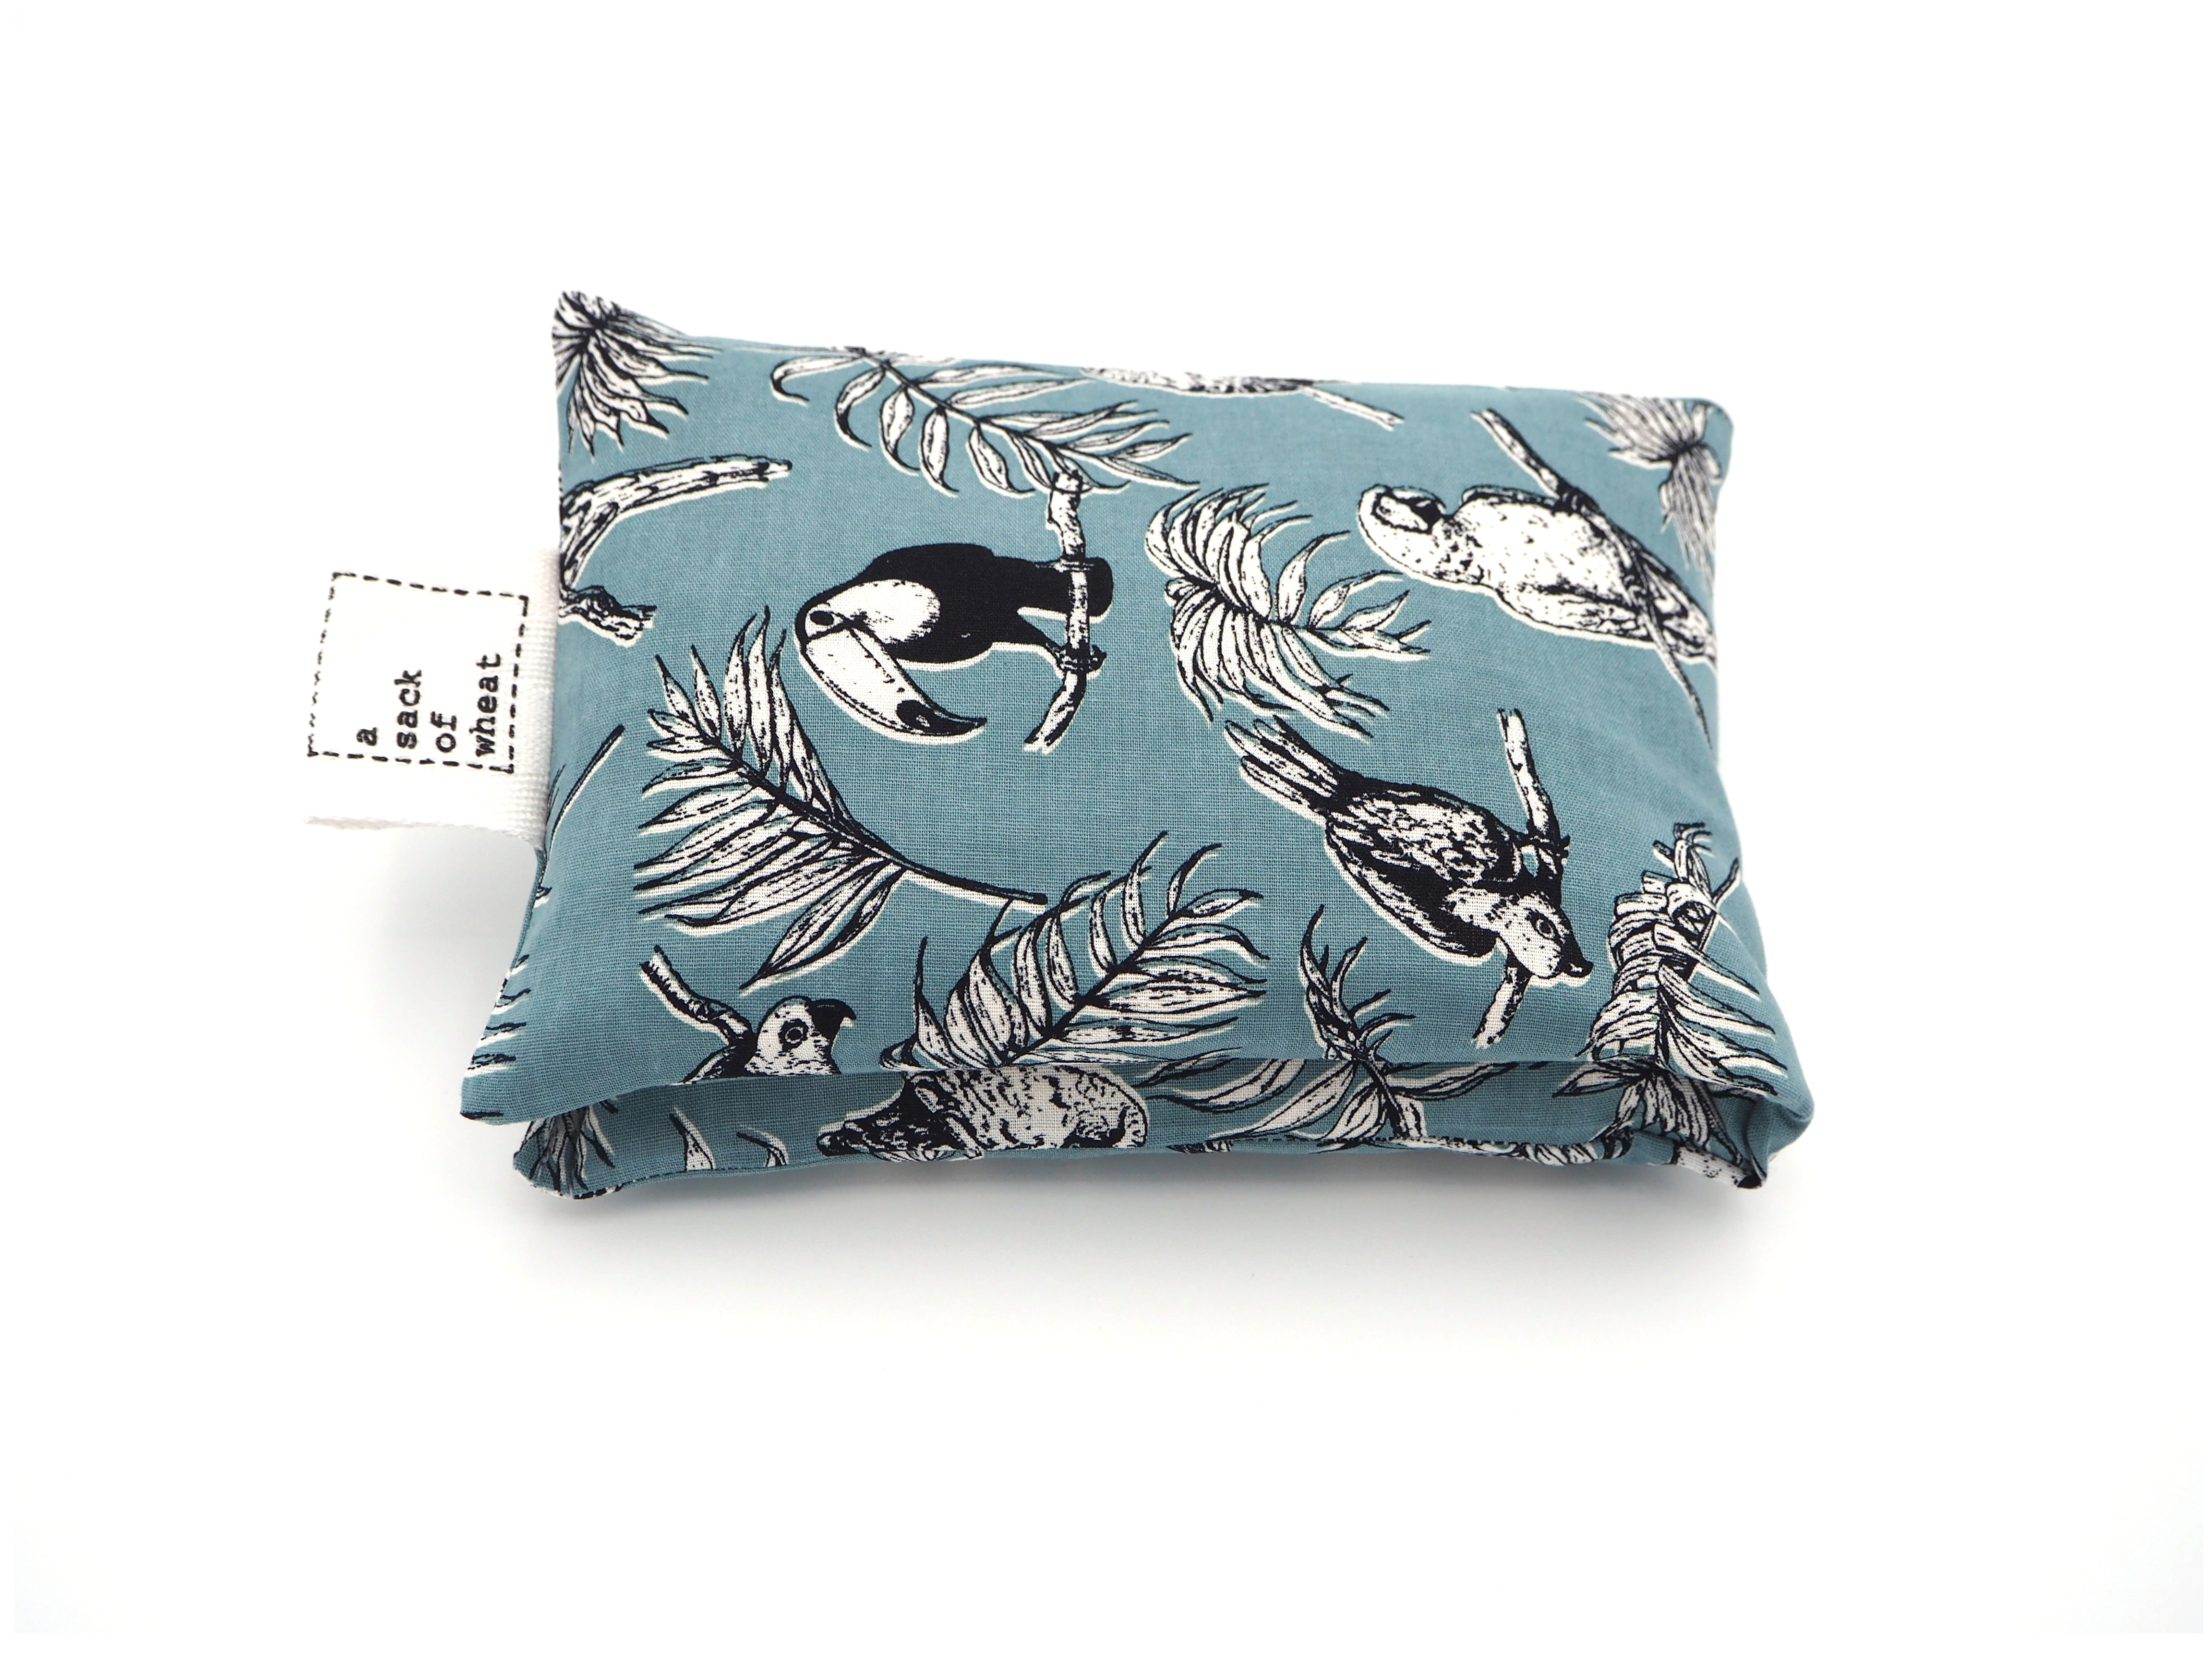 Folded view of A Sack Of Wheat, featuring beautiful Toucans & Parrots, on a soft blue background, 100% cotton fabric